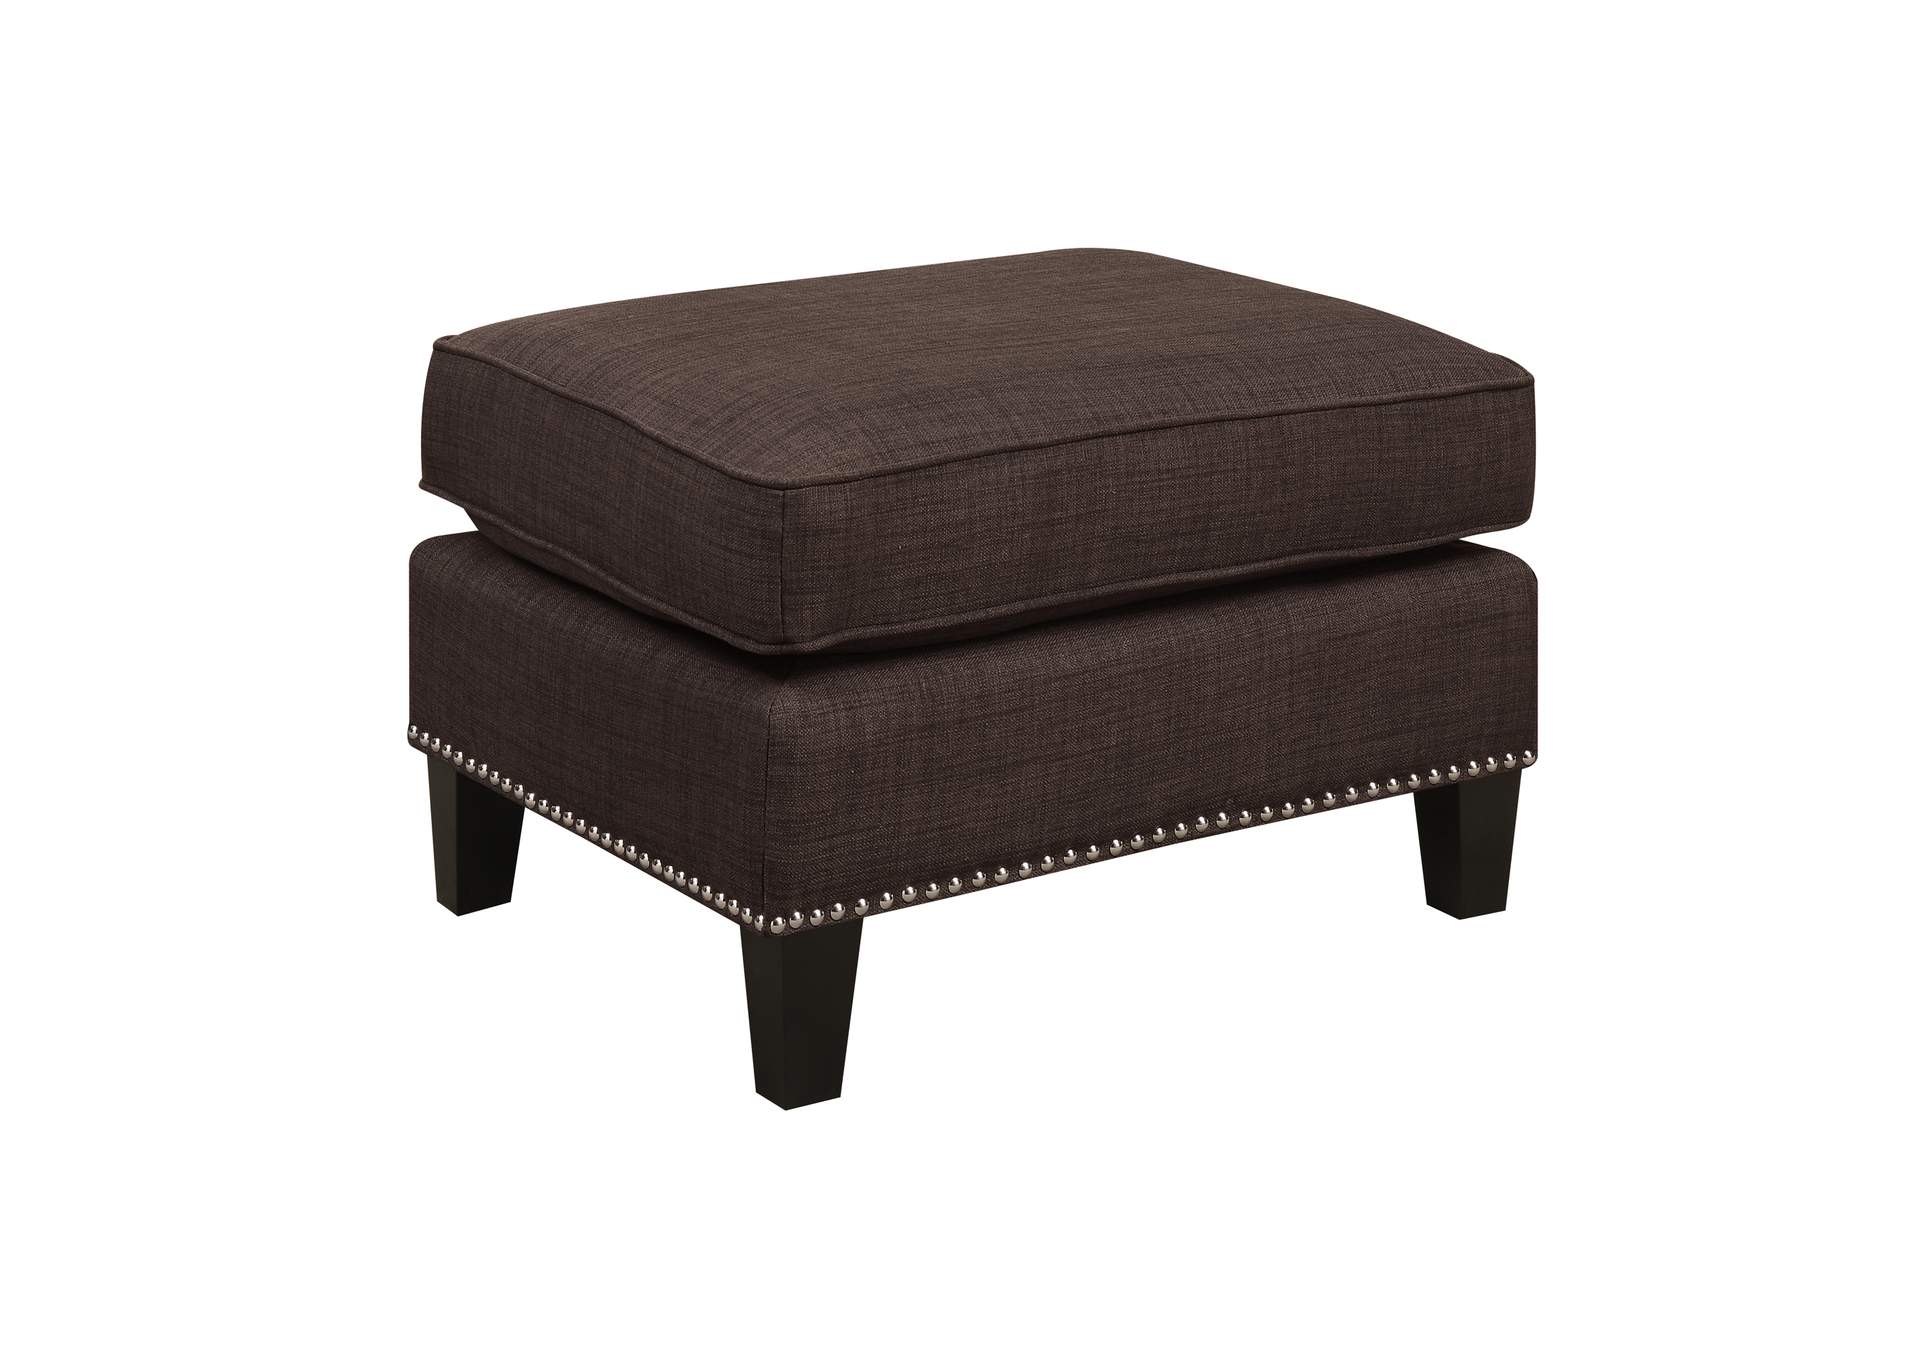 Erica 497 Ottoman With Chrome Nail Heirloom Chocolate,Elements